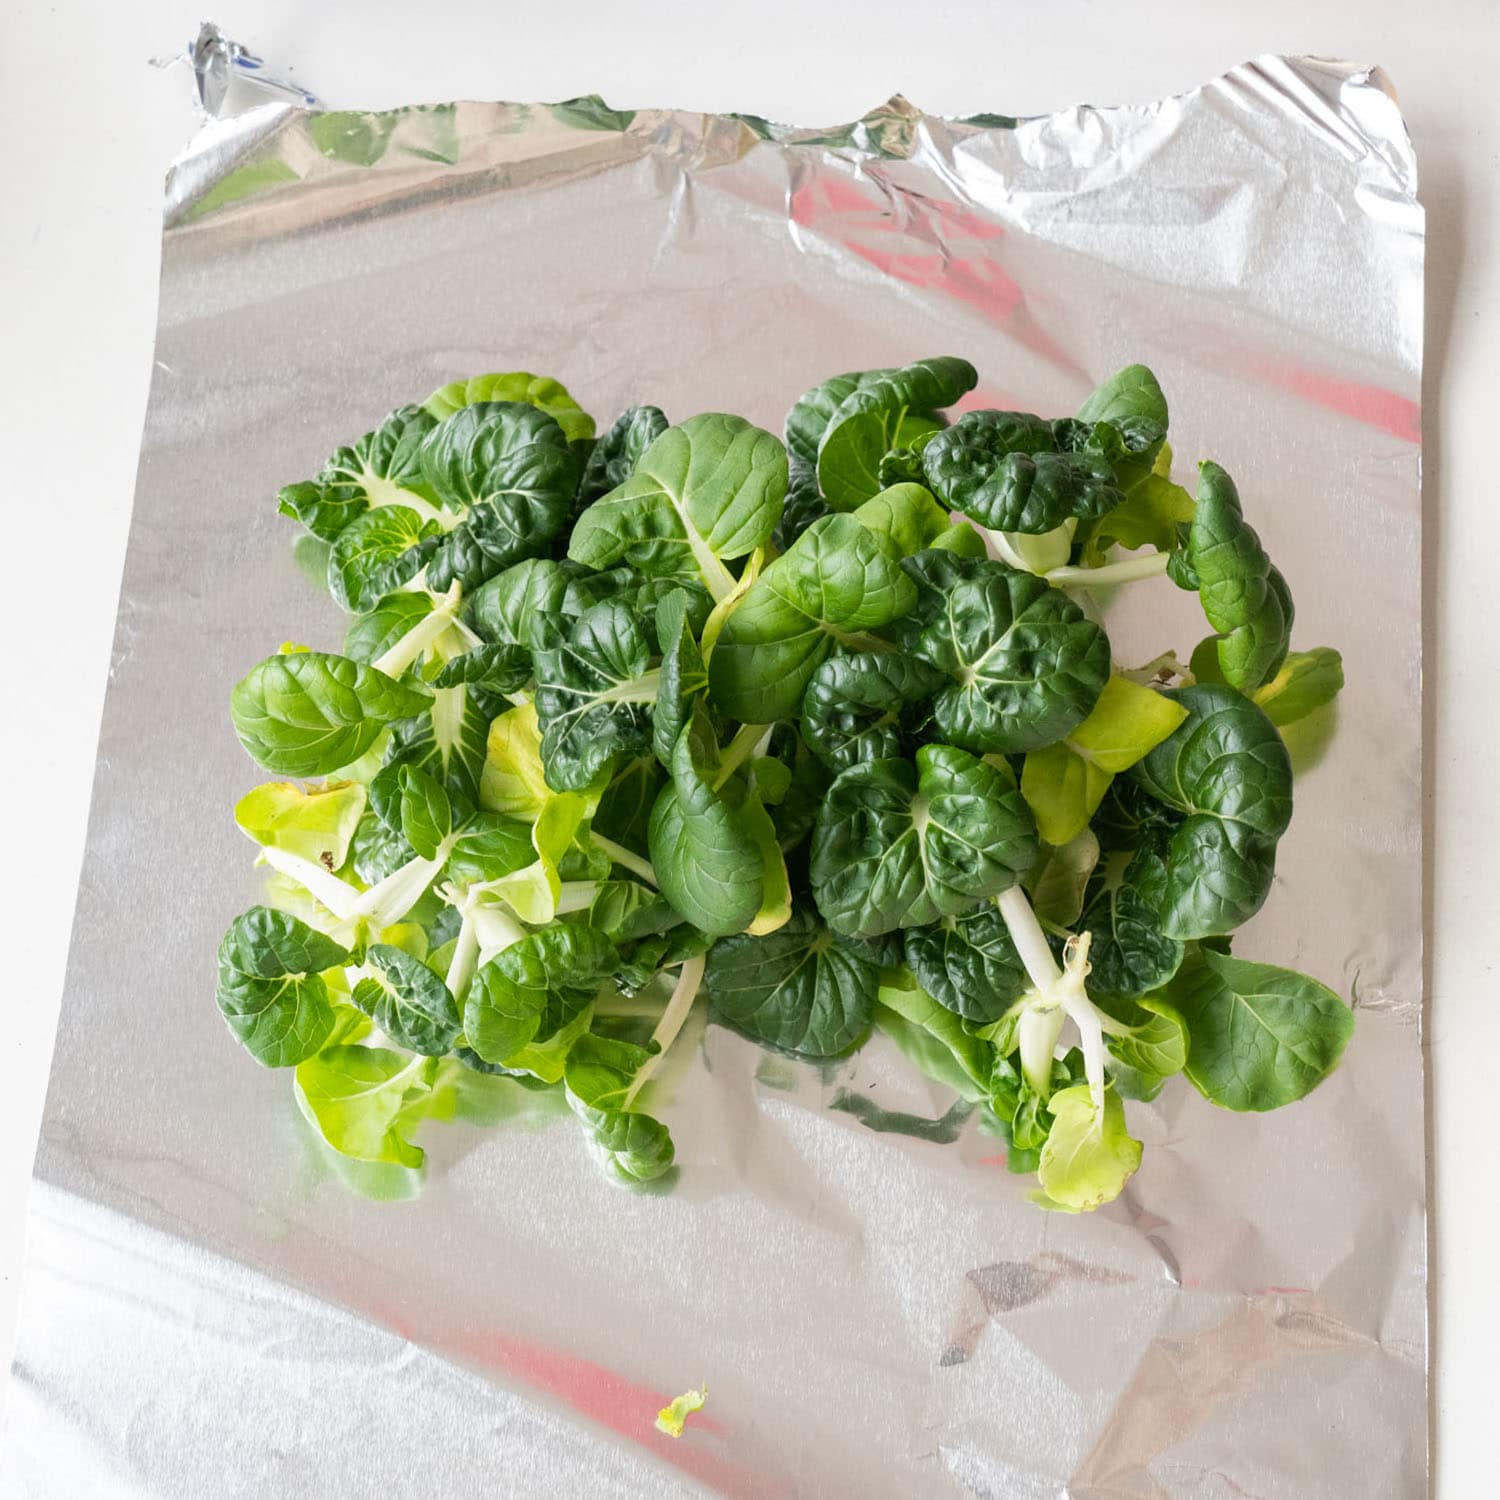 How to Store Bok Choy